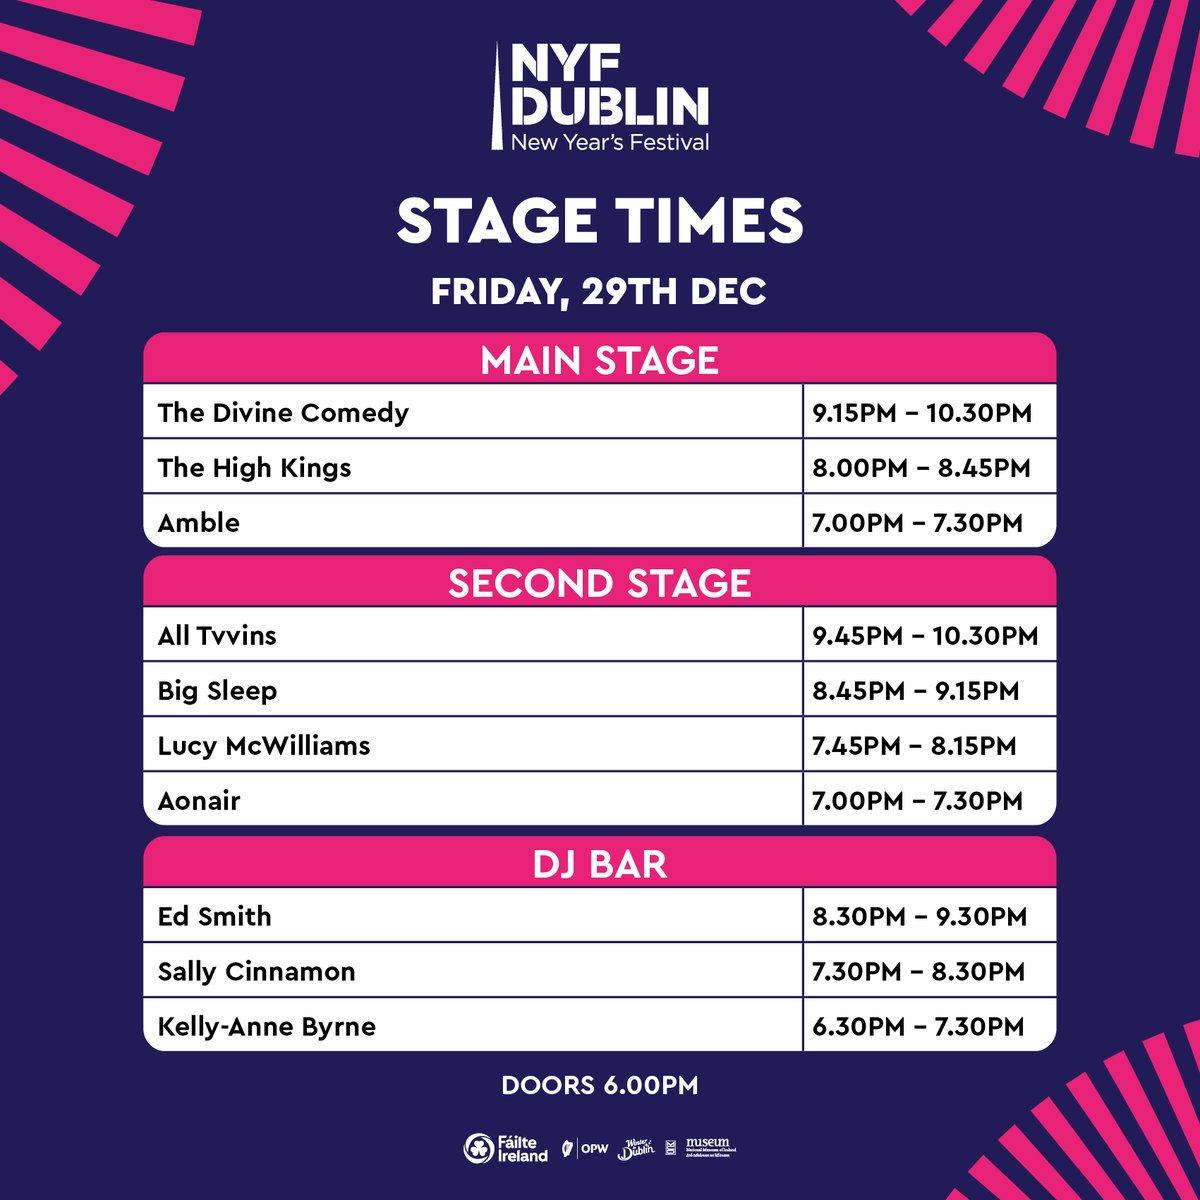 🎉 Welcome to Day 1 of New Years Festival Dublin! 🎉 The gates open at 6PM at Collins Barracks, and we can't wait to see you there! @NMIreland ⭐️ Use #TheOnlyPlaceToBe and #NYFDublin to share your moments.